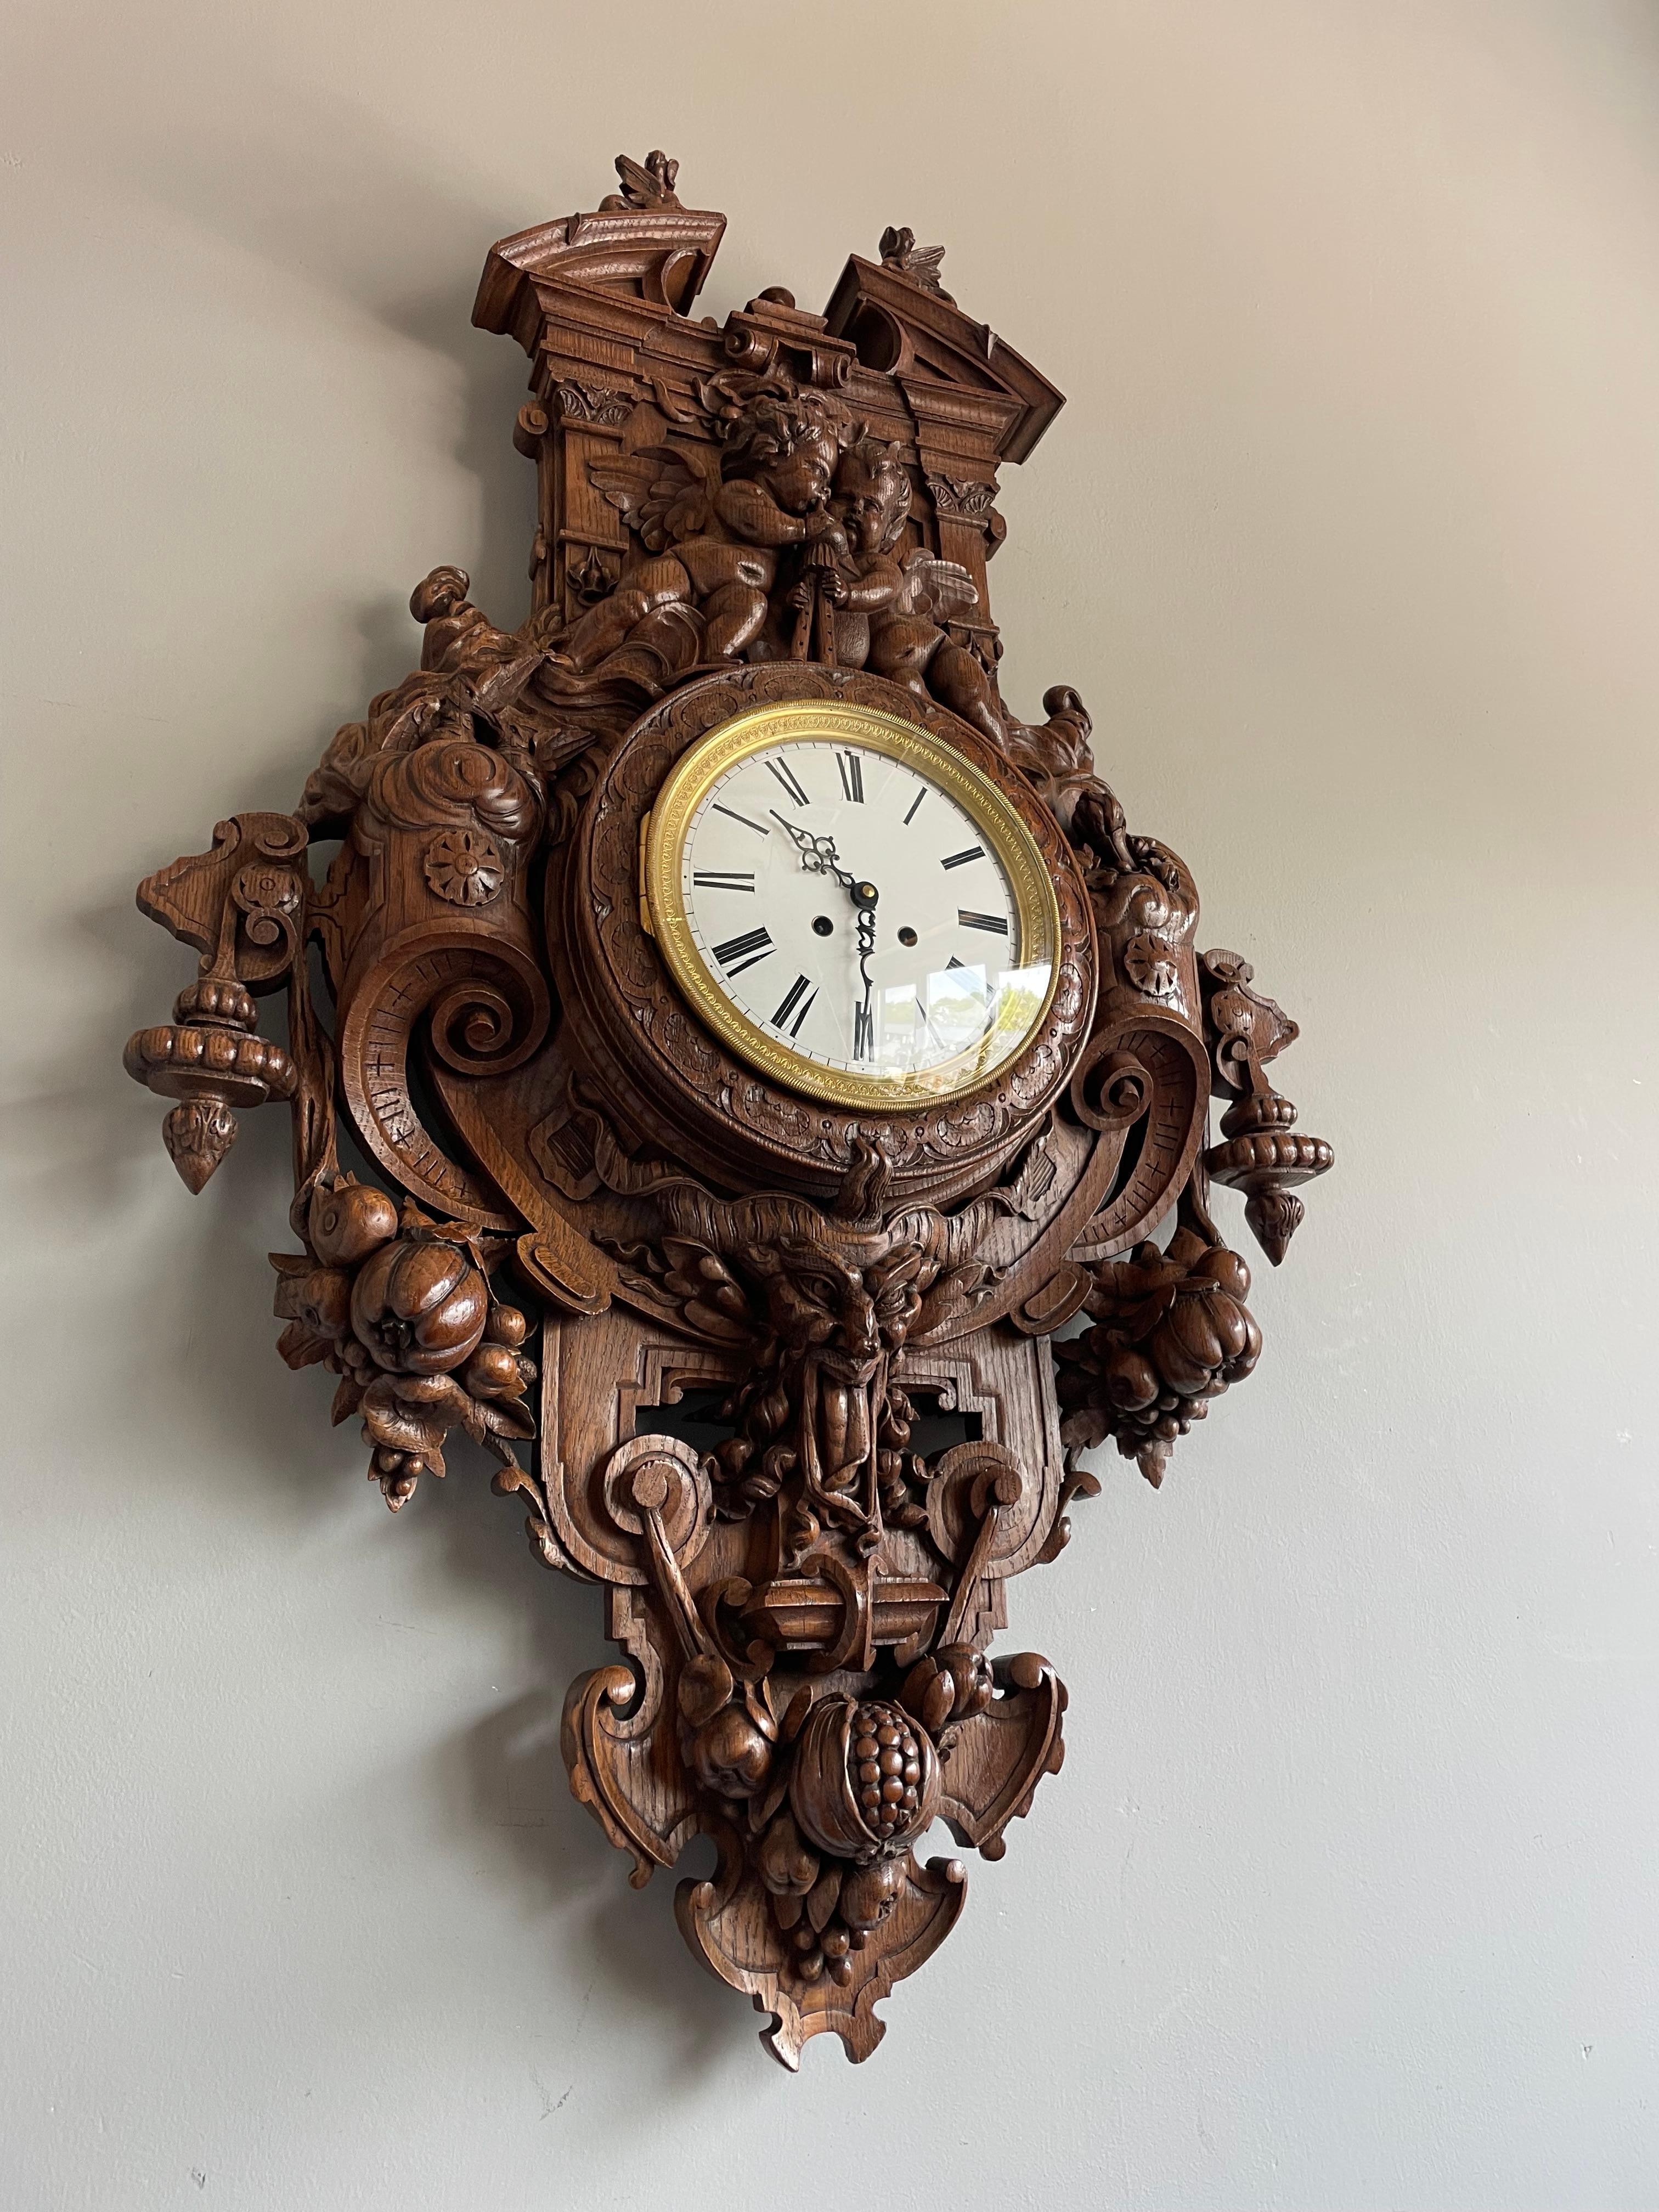 19th Century Antique & Huge Hand Carved Wall Clock by Parisian Top Makers Guéret Frères 1860s For Sale